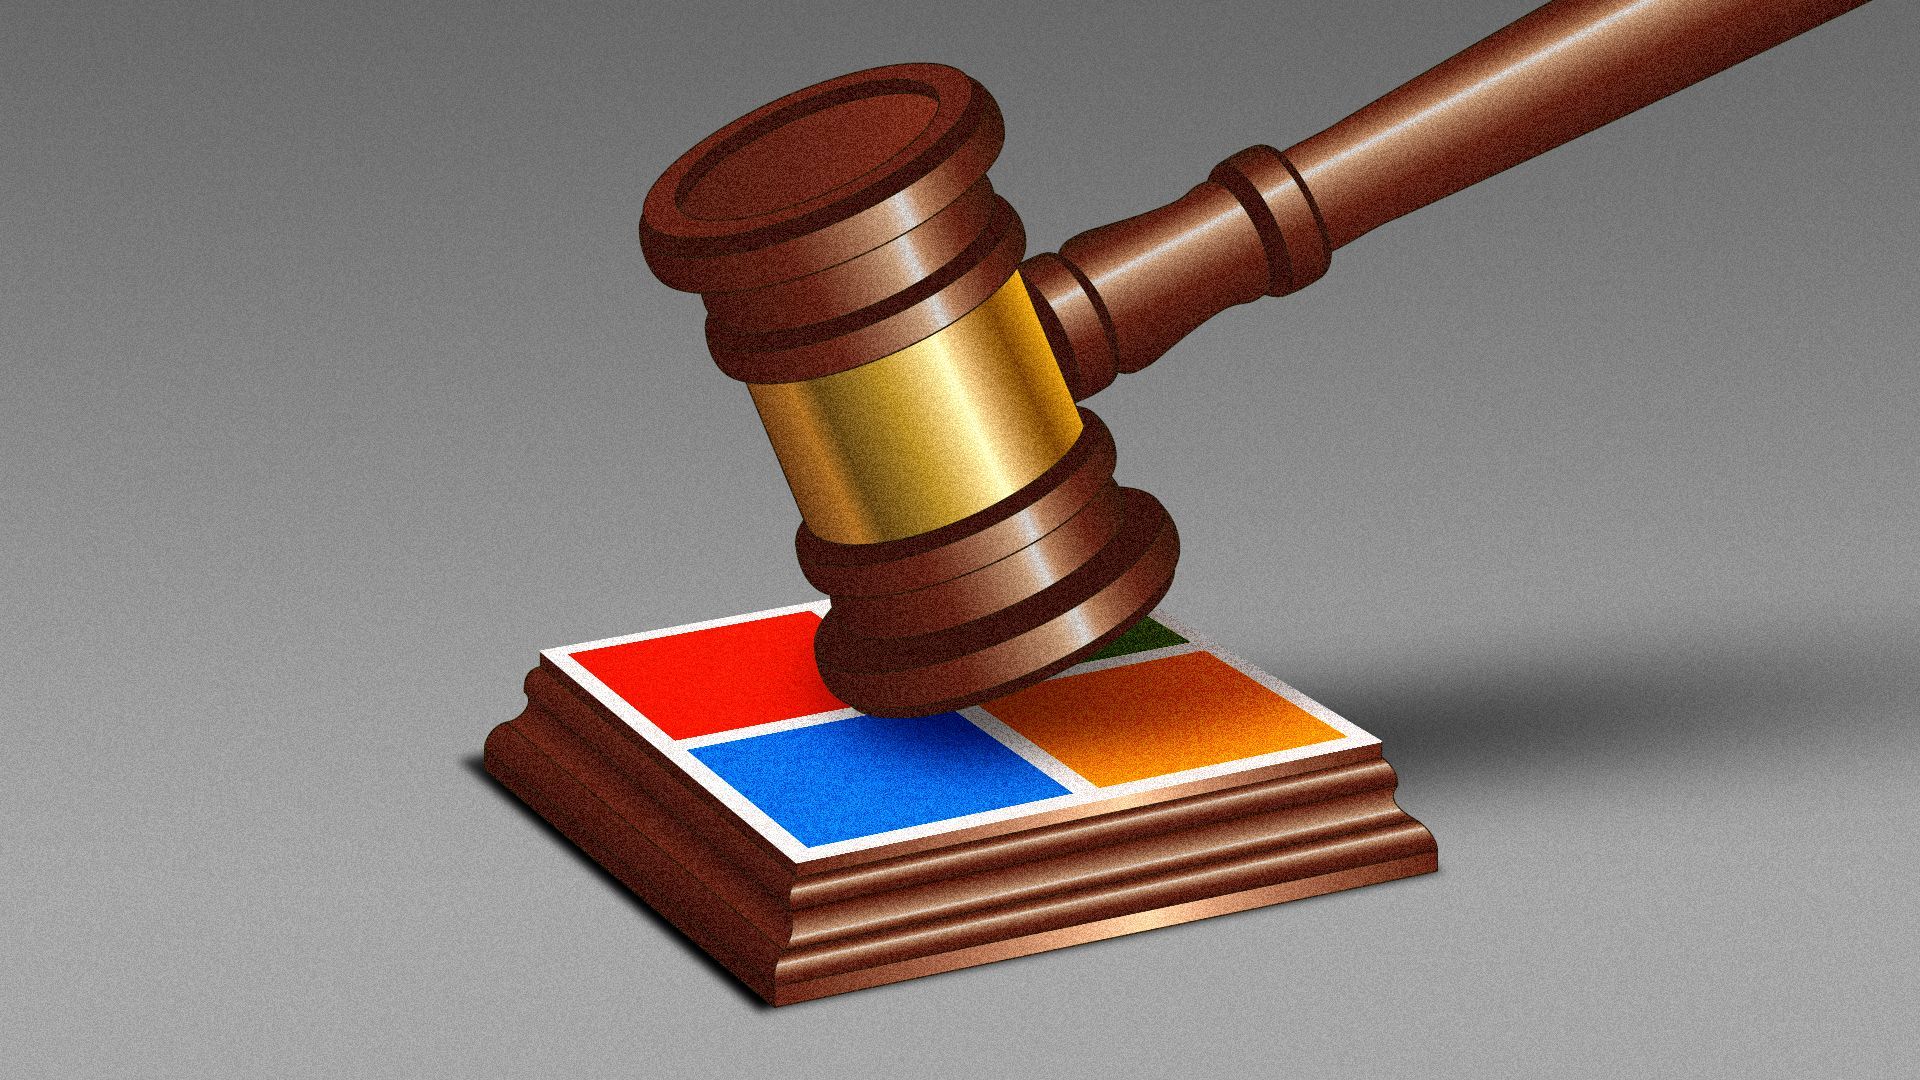 Illustration of a gavel striking a square block with the Microsoft logo.